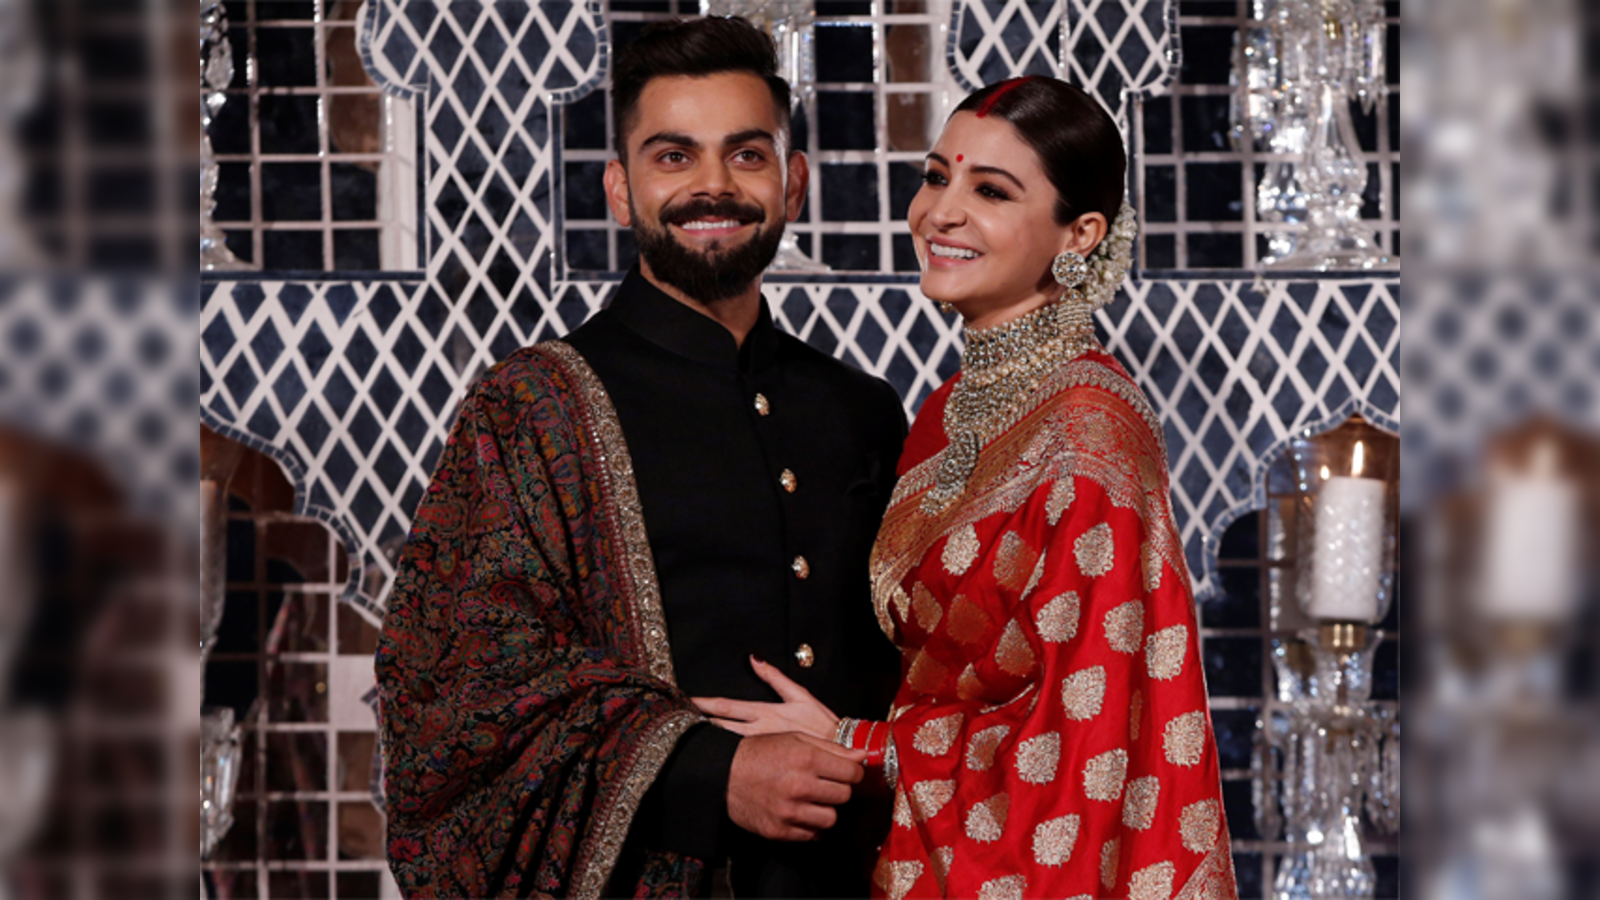 These details about Anushka Sharma's wedding lehenga will blow your mind |  Filmfare.com